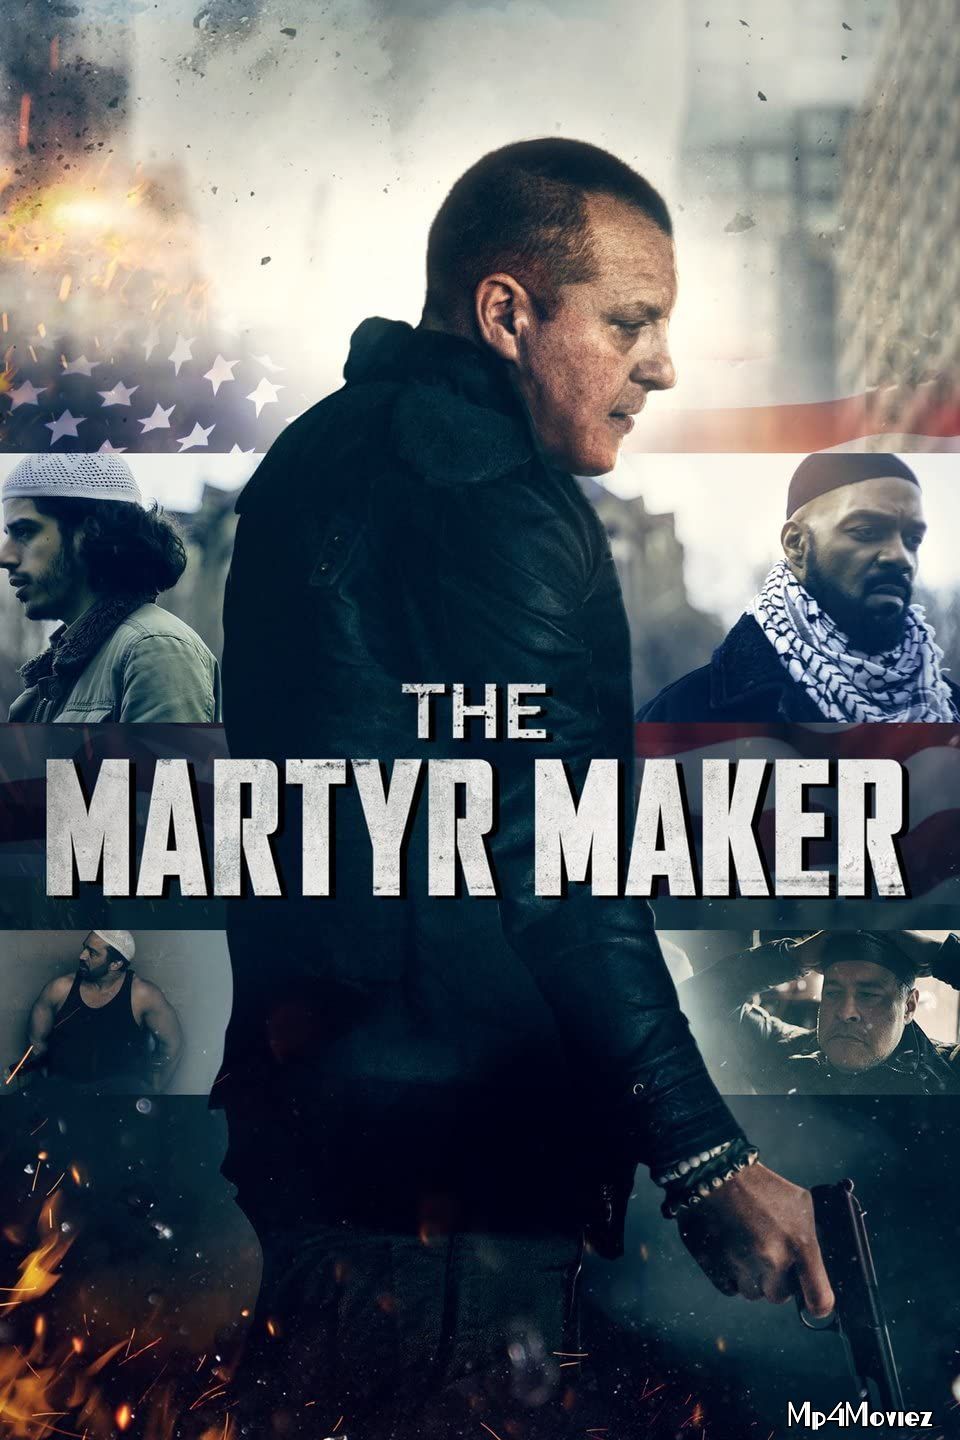 The Martyr Maker 2018 Hindi Dubbed Full Movie download full movie